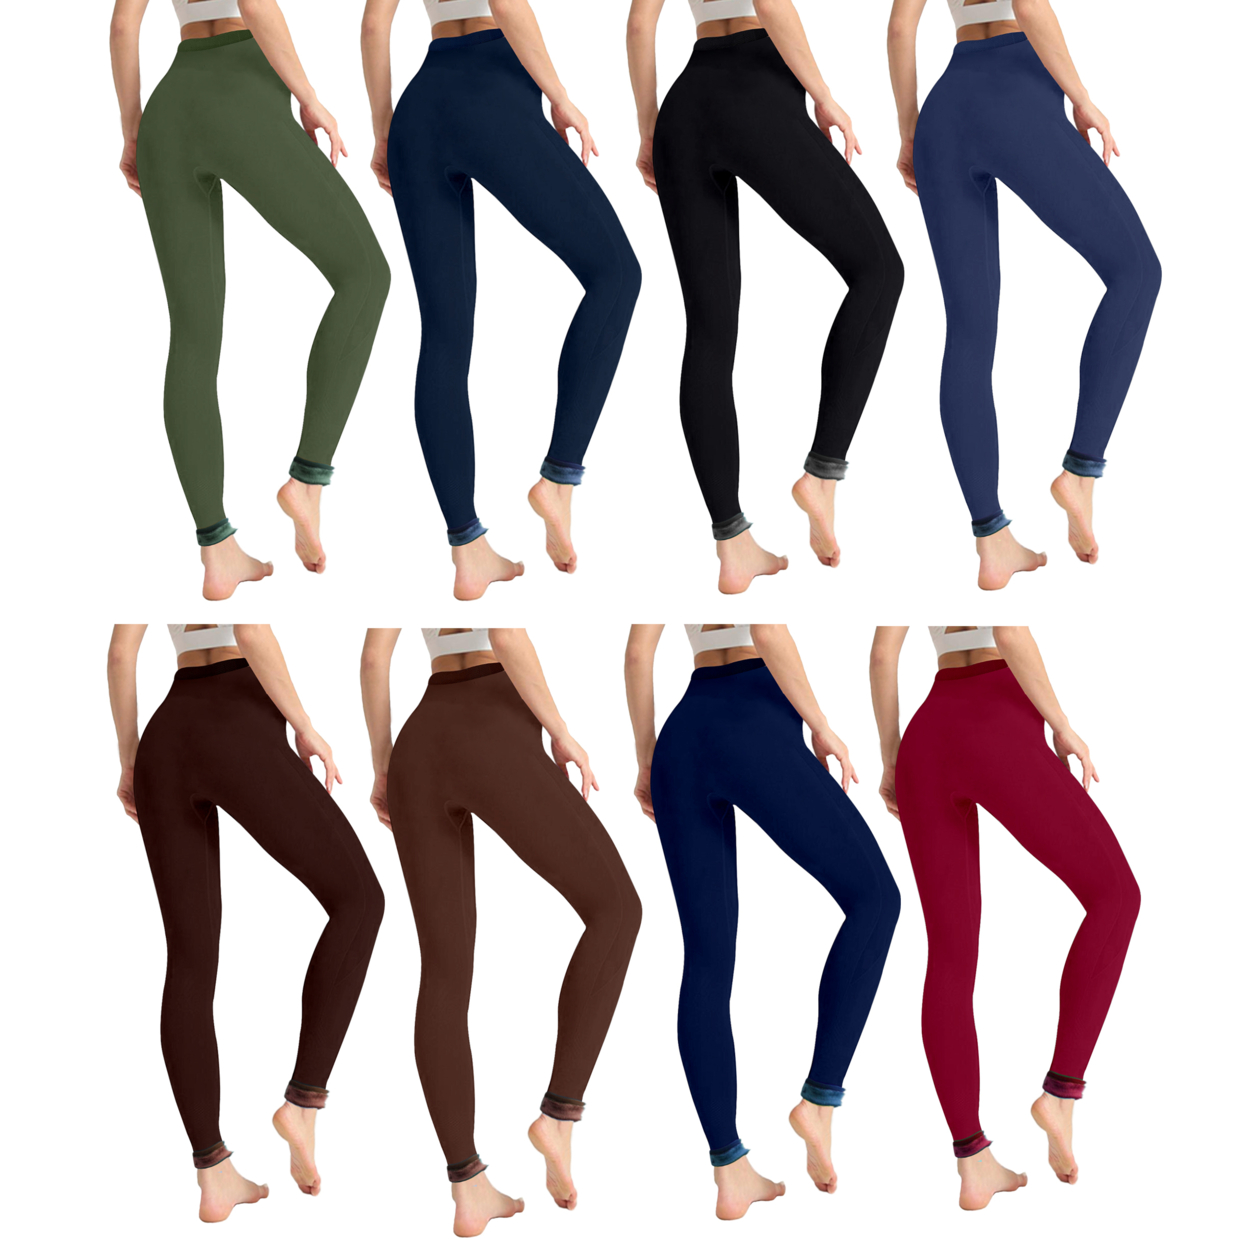 4-Pack: Women's Winter Warm Thick Fur Lined Thermal Leggings (S-2XL) - Assorted, Small/Medium